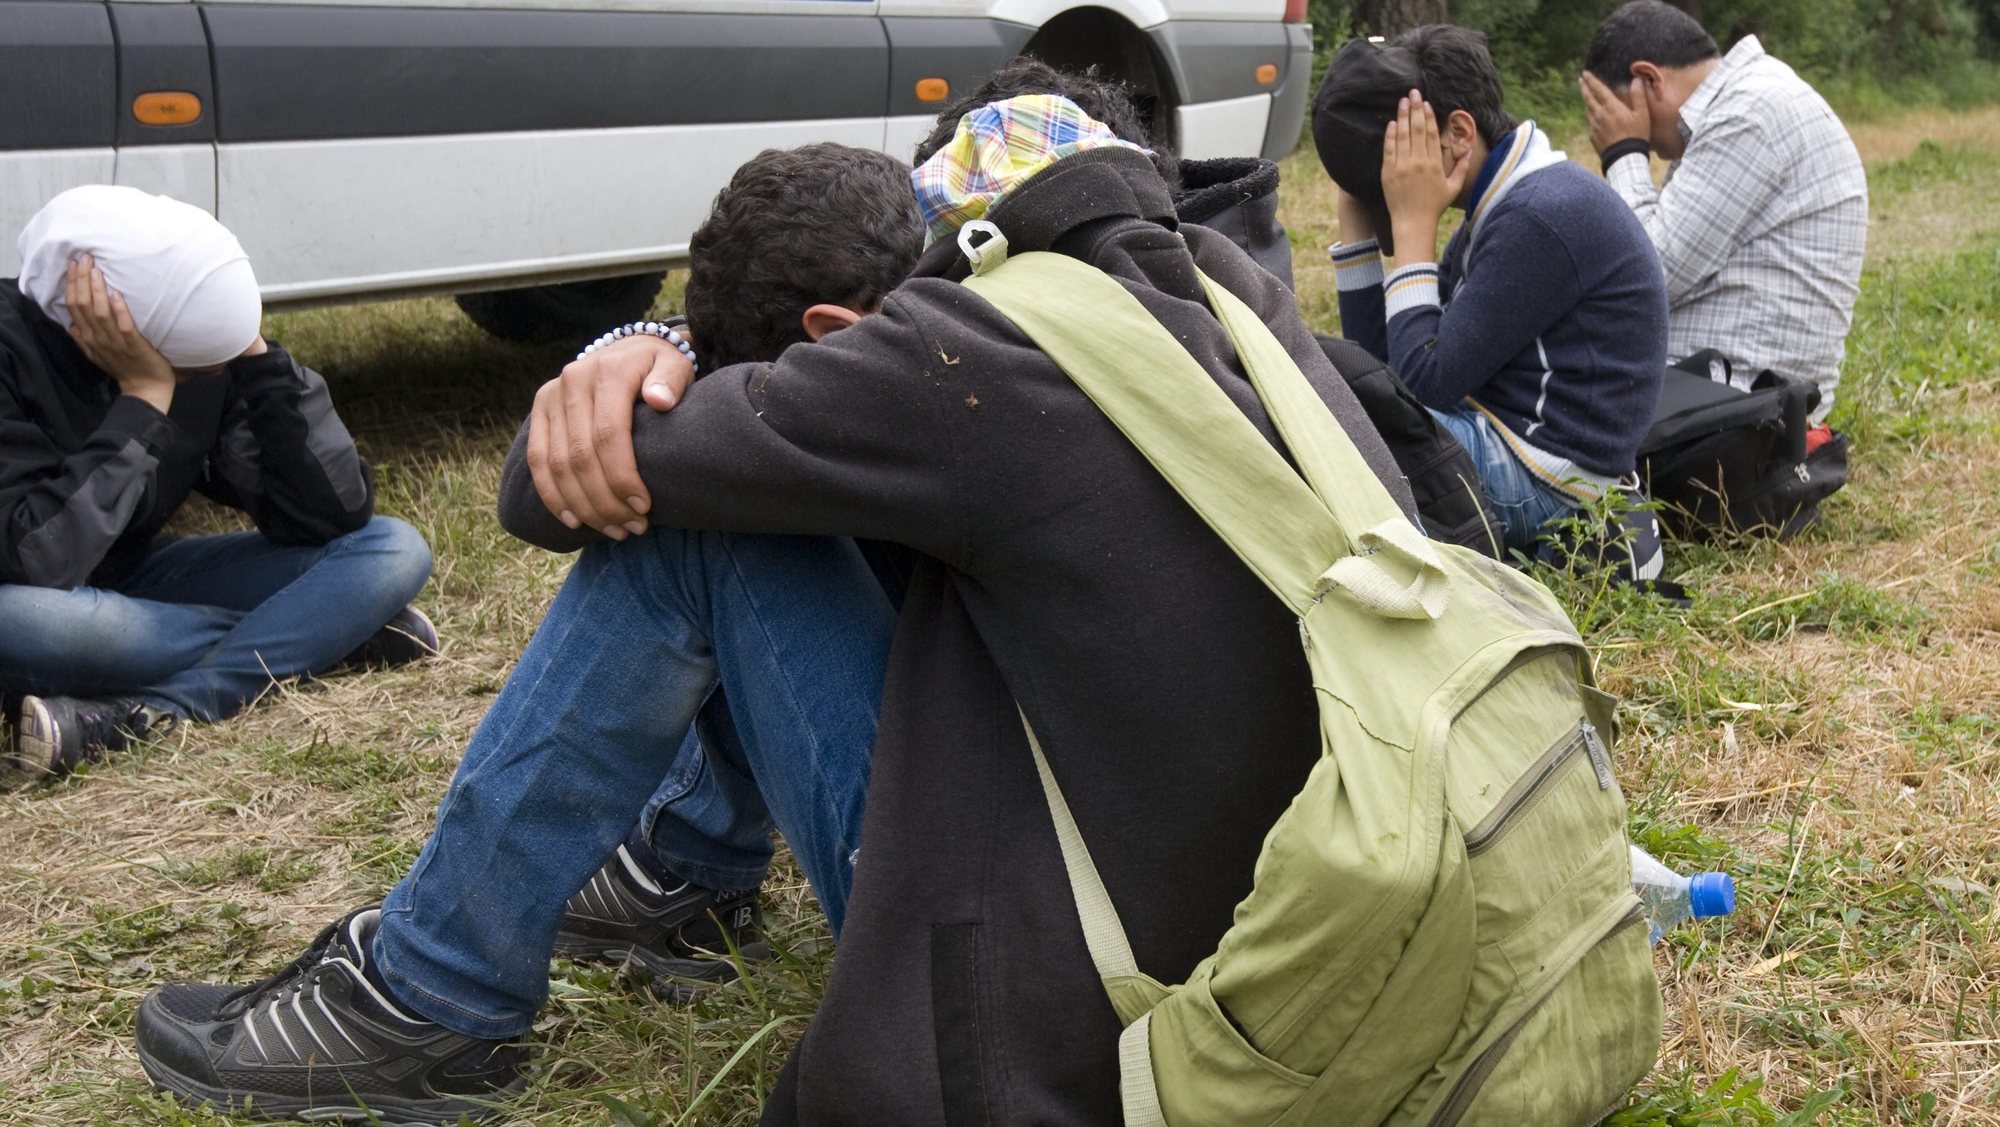 epa04814995 Migrants, who were captured on an eyot of the Tisza River, next to a police van near Szeged, 170 kms southeast of Budapest, Hungary, 23 June 2015. EU foreign ministers on 22 June launched a military mission in the Mediterranean Sea aimed at cracking down on migrant smuggling networks and dismantling the trade, as part of a broader effort to curb the loss of life. Half of the EU&#039;s 28 member states are taking part in the operation, including Belgium, Britain, Finland, France, Germany, Greece, Hungary, Italy, Lithuania, Luxembourg, the Netherlands, Slovenia, Spain and Sweden.  EPA/ZOLTAN GERGELY KELEMEN HUNGARY OUT